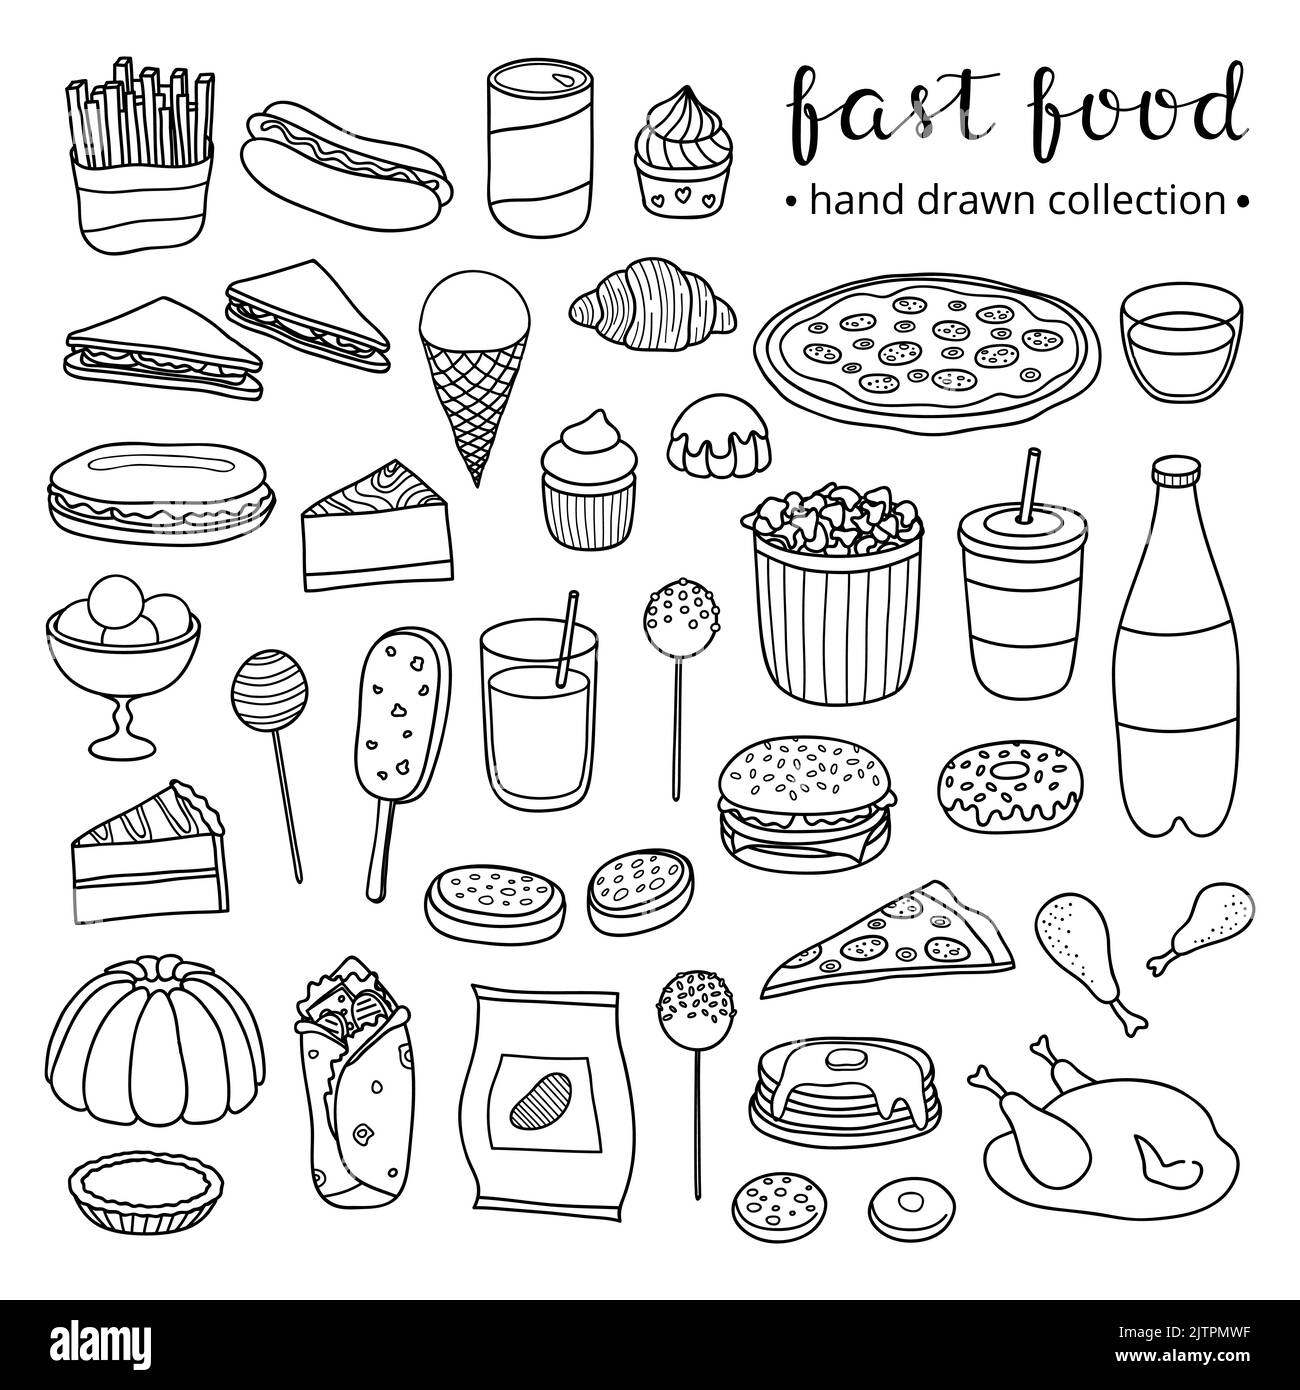 Collection of hand drawn outline fast food meals including pizza, burger, ice cream, cake, hot dog, chicken, burrito, popcorn, lemonade, chips, fries, Stock Vector